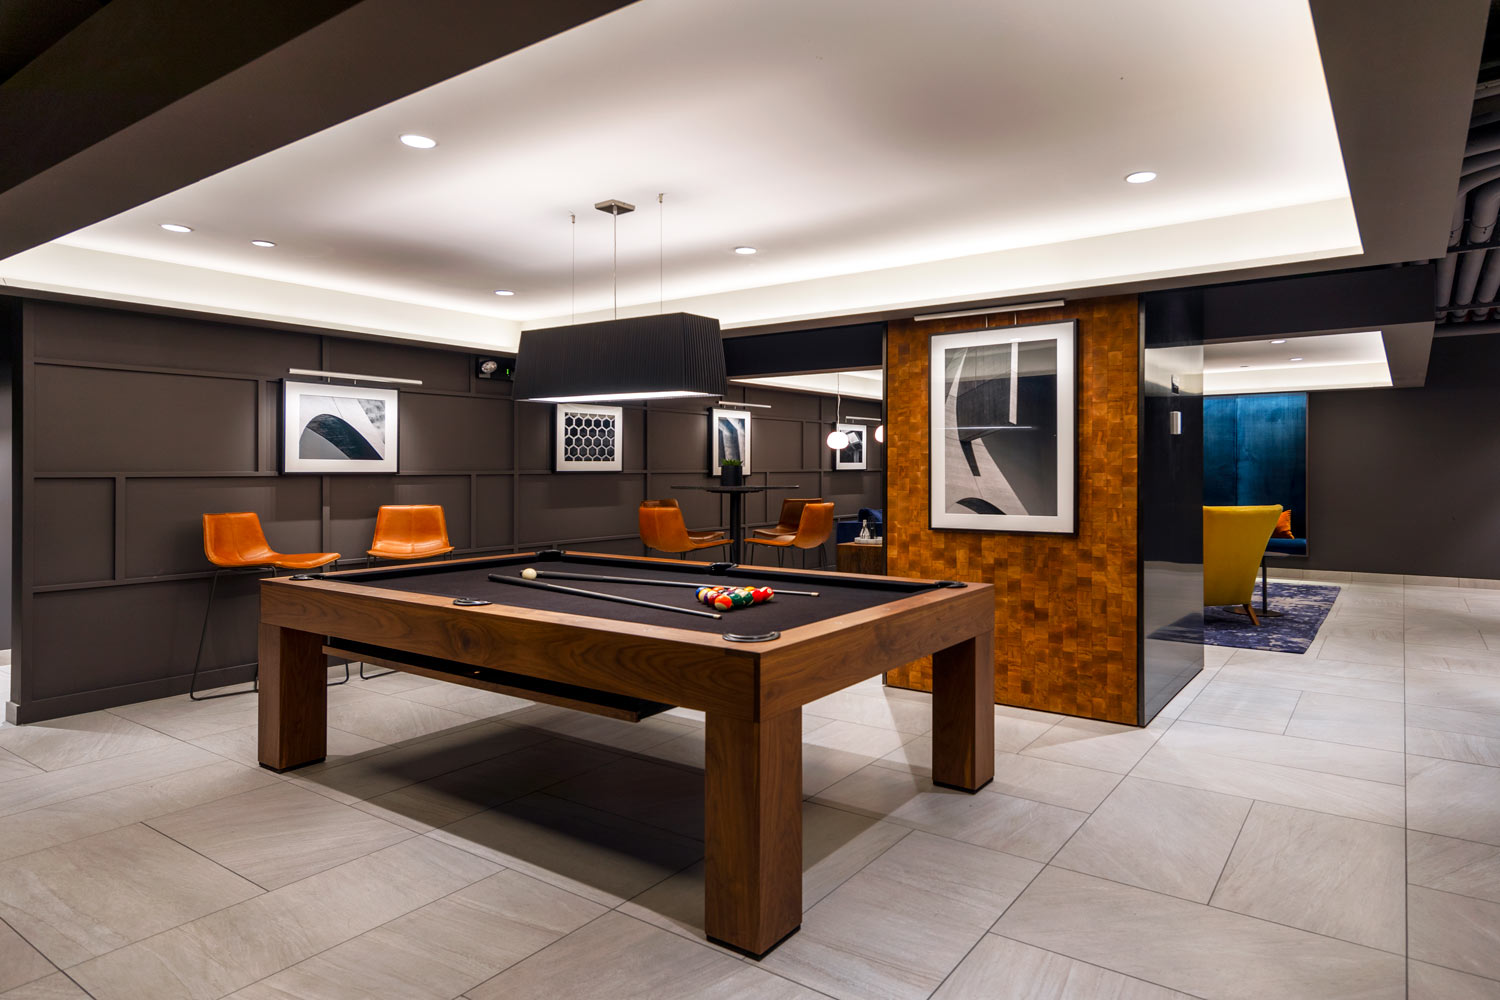 Game lounge with black felt pool table and marble floors, black walls, and art deco wood detailing